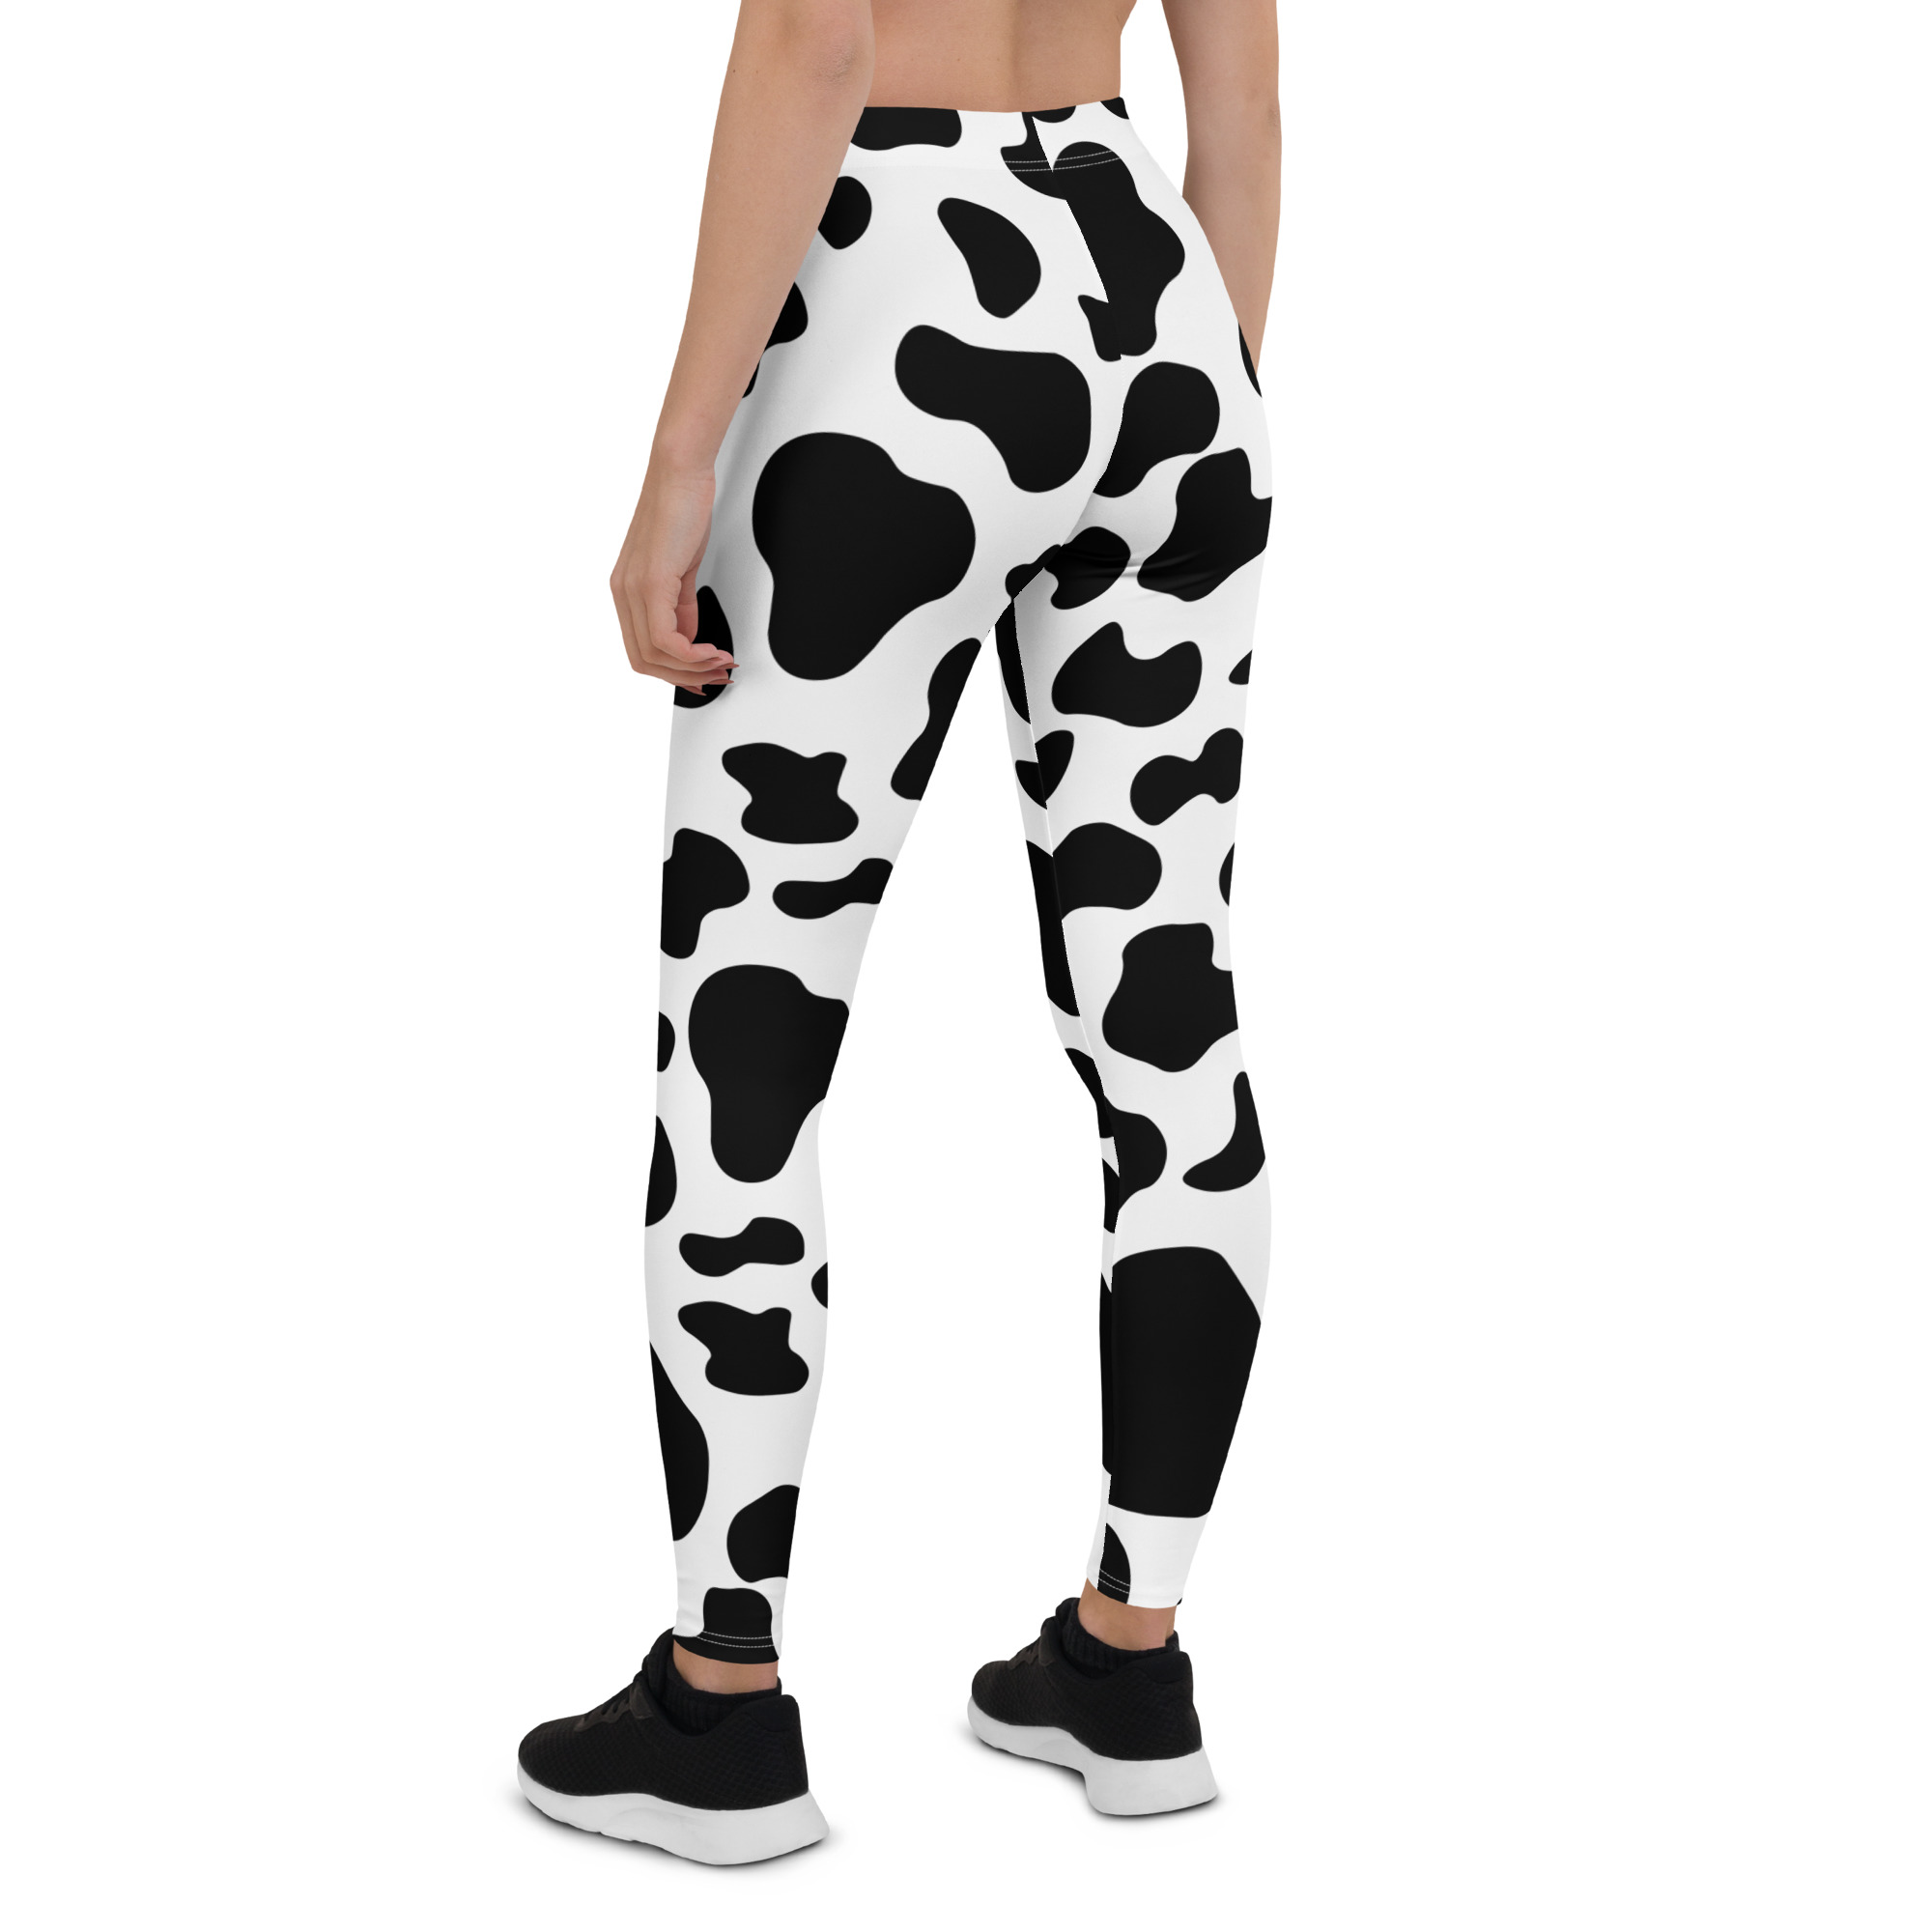 weworewhat XS X-SMALL cow print white brown printed leggings v-shaped